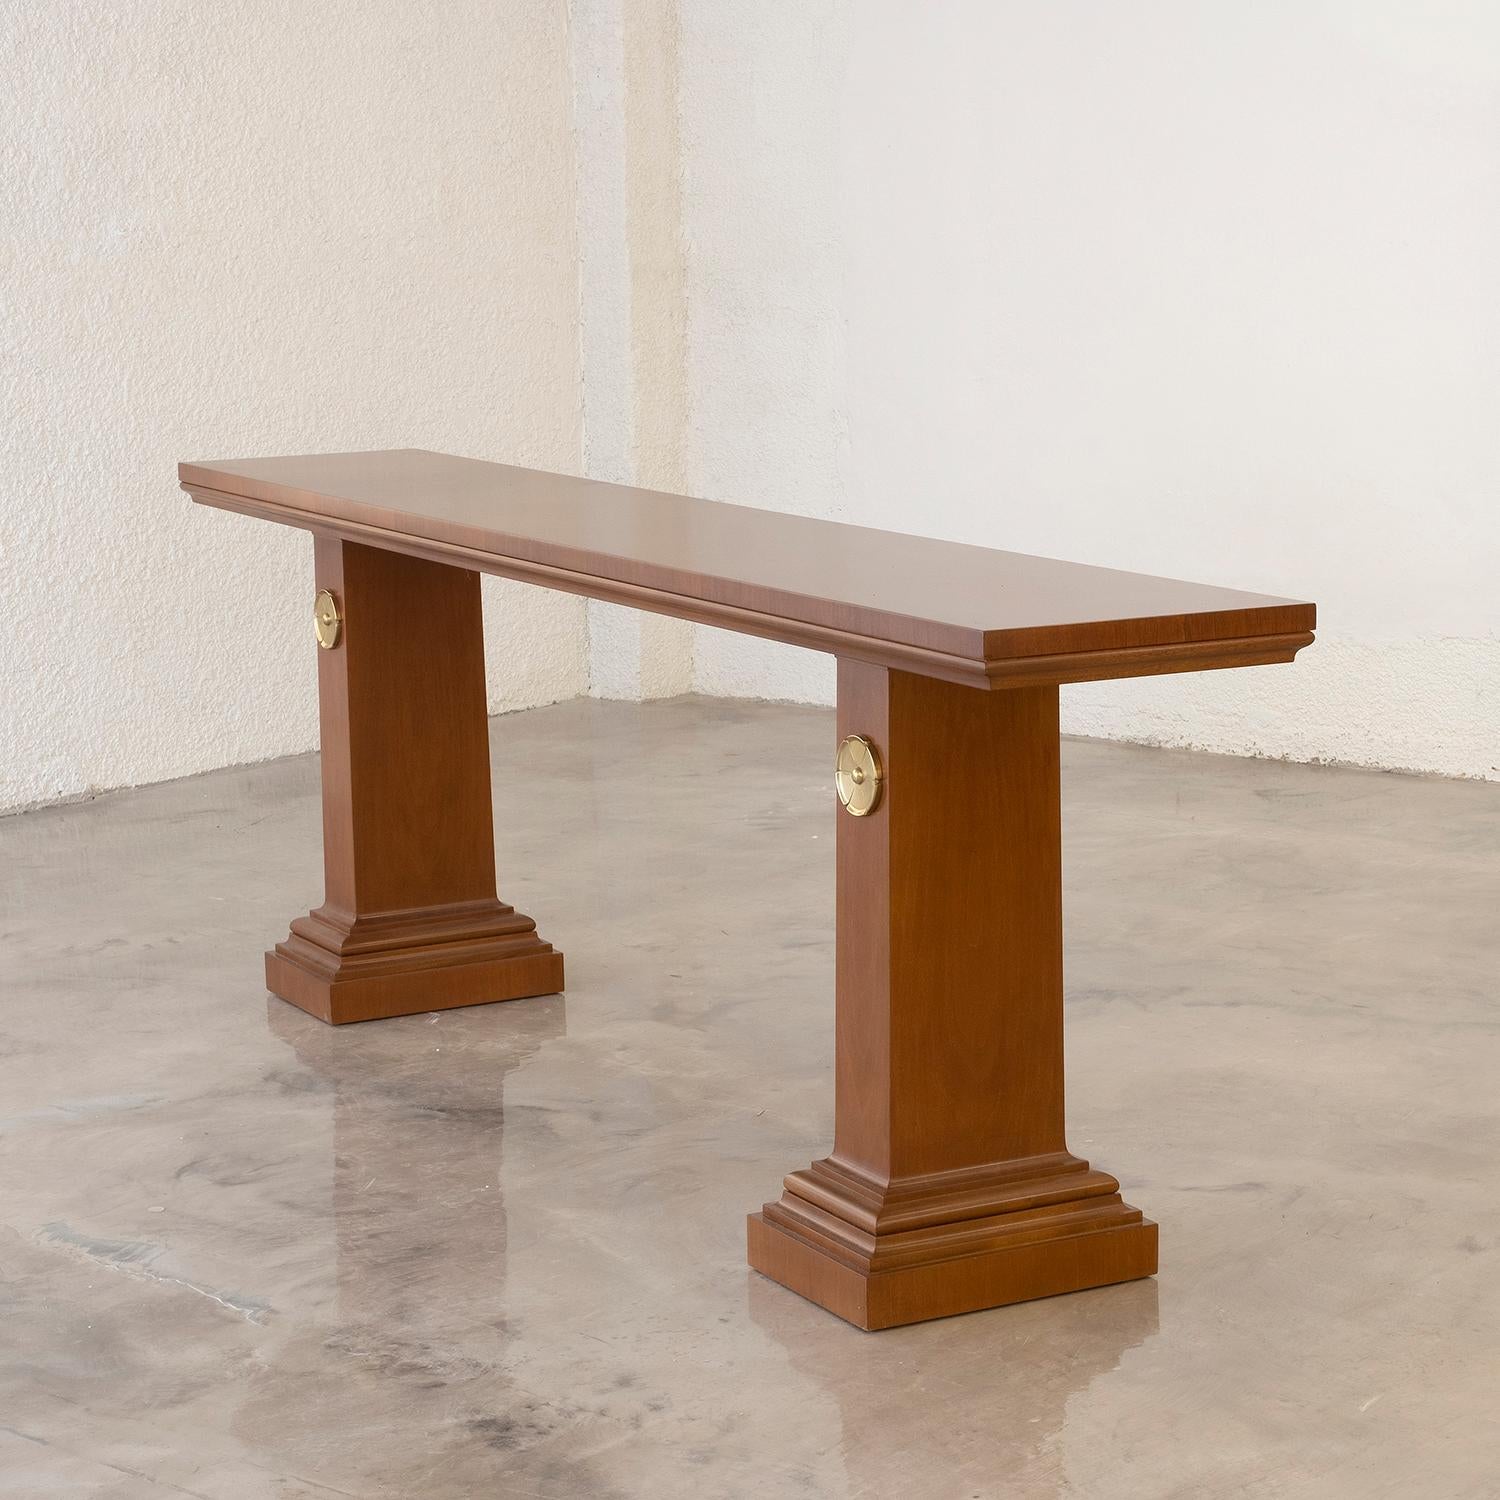 Hand-Carved 20th Century Greek Saridis Walnut, Brass Console Table by T.H. Robsjohn-Gibbings